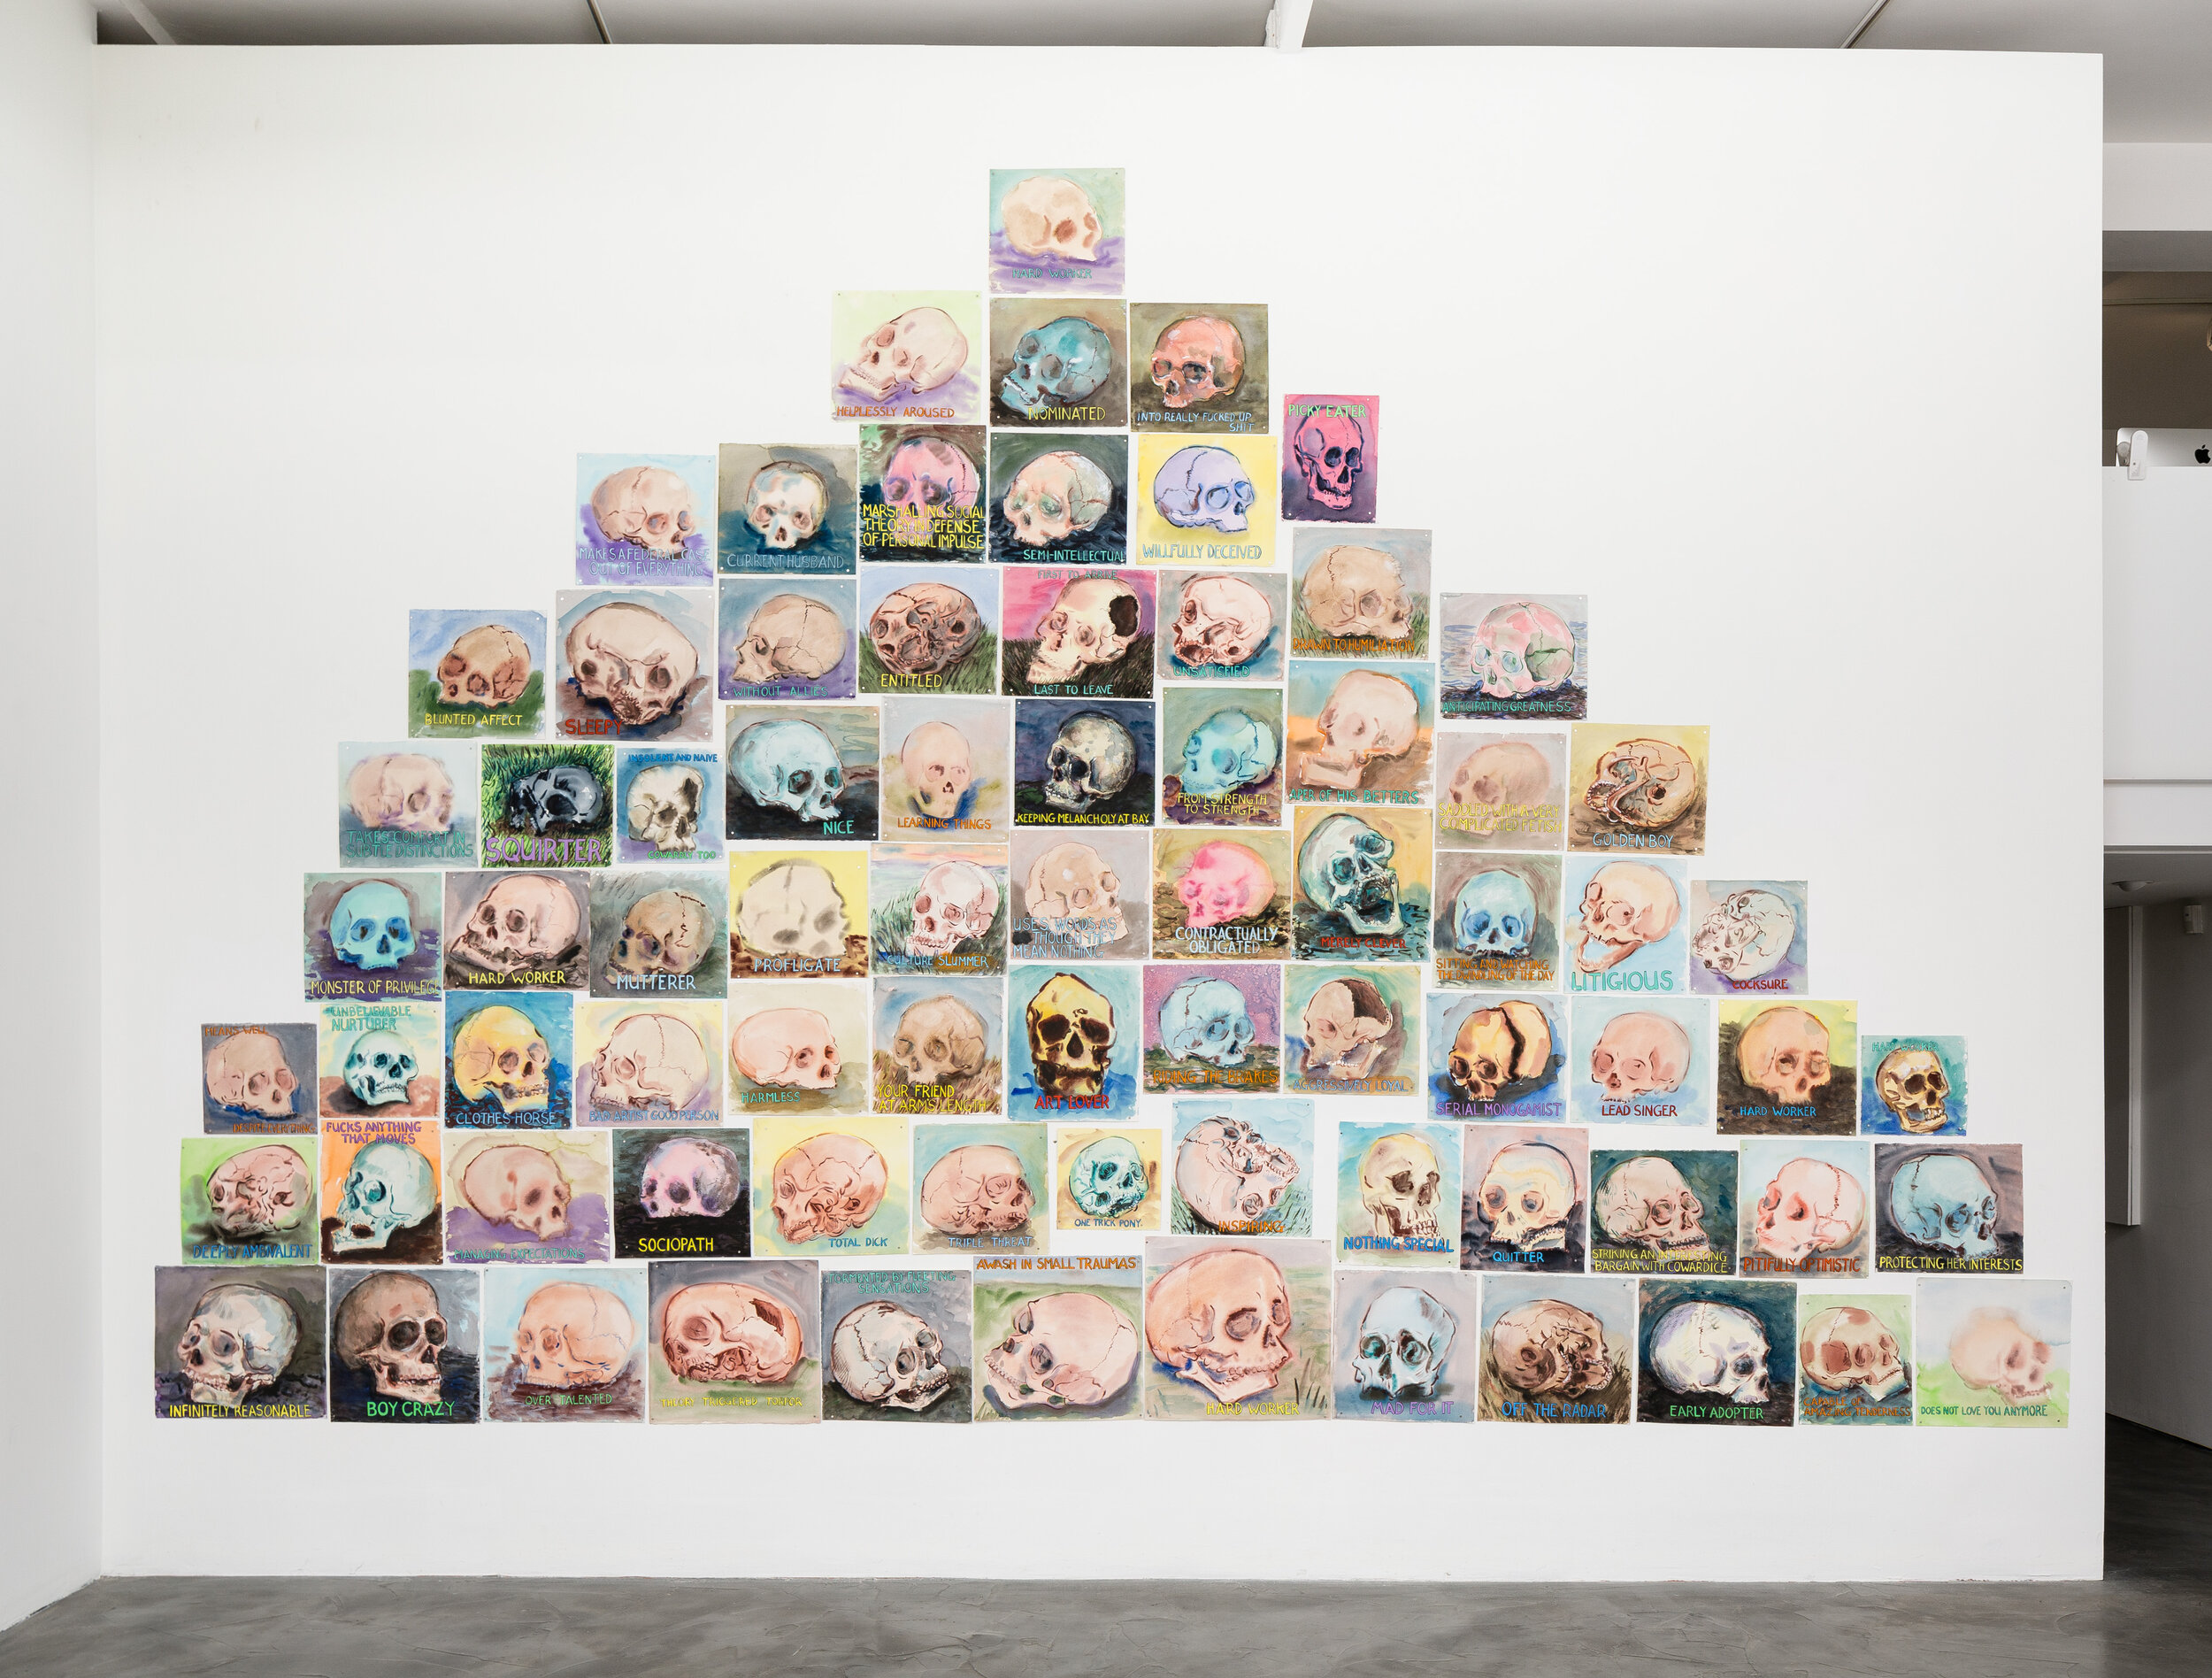  Guy Richards Smit,  A Mountain of Skulls and Not One I Recognize , Installation at CJG, Feb 2016 